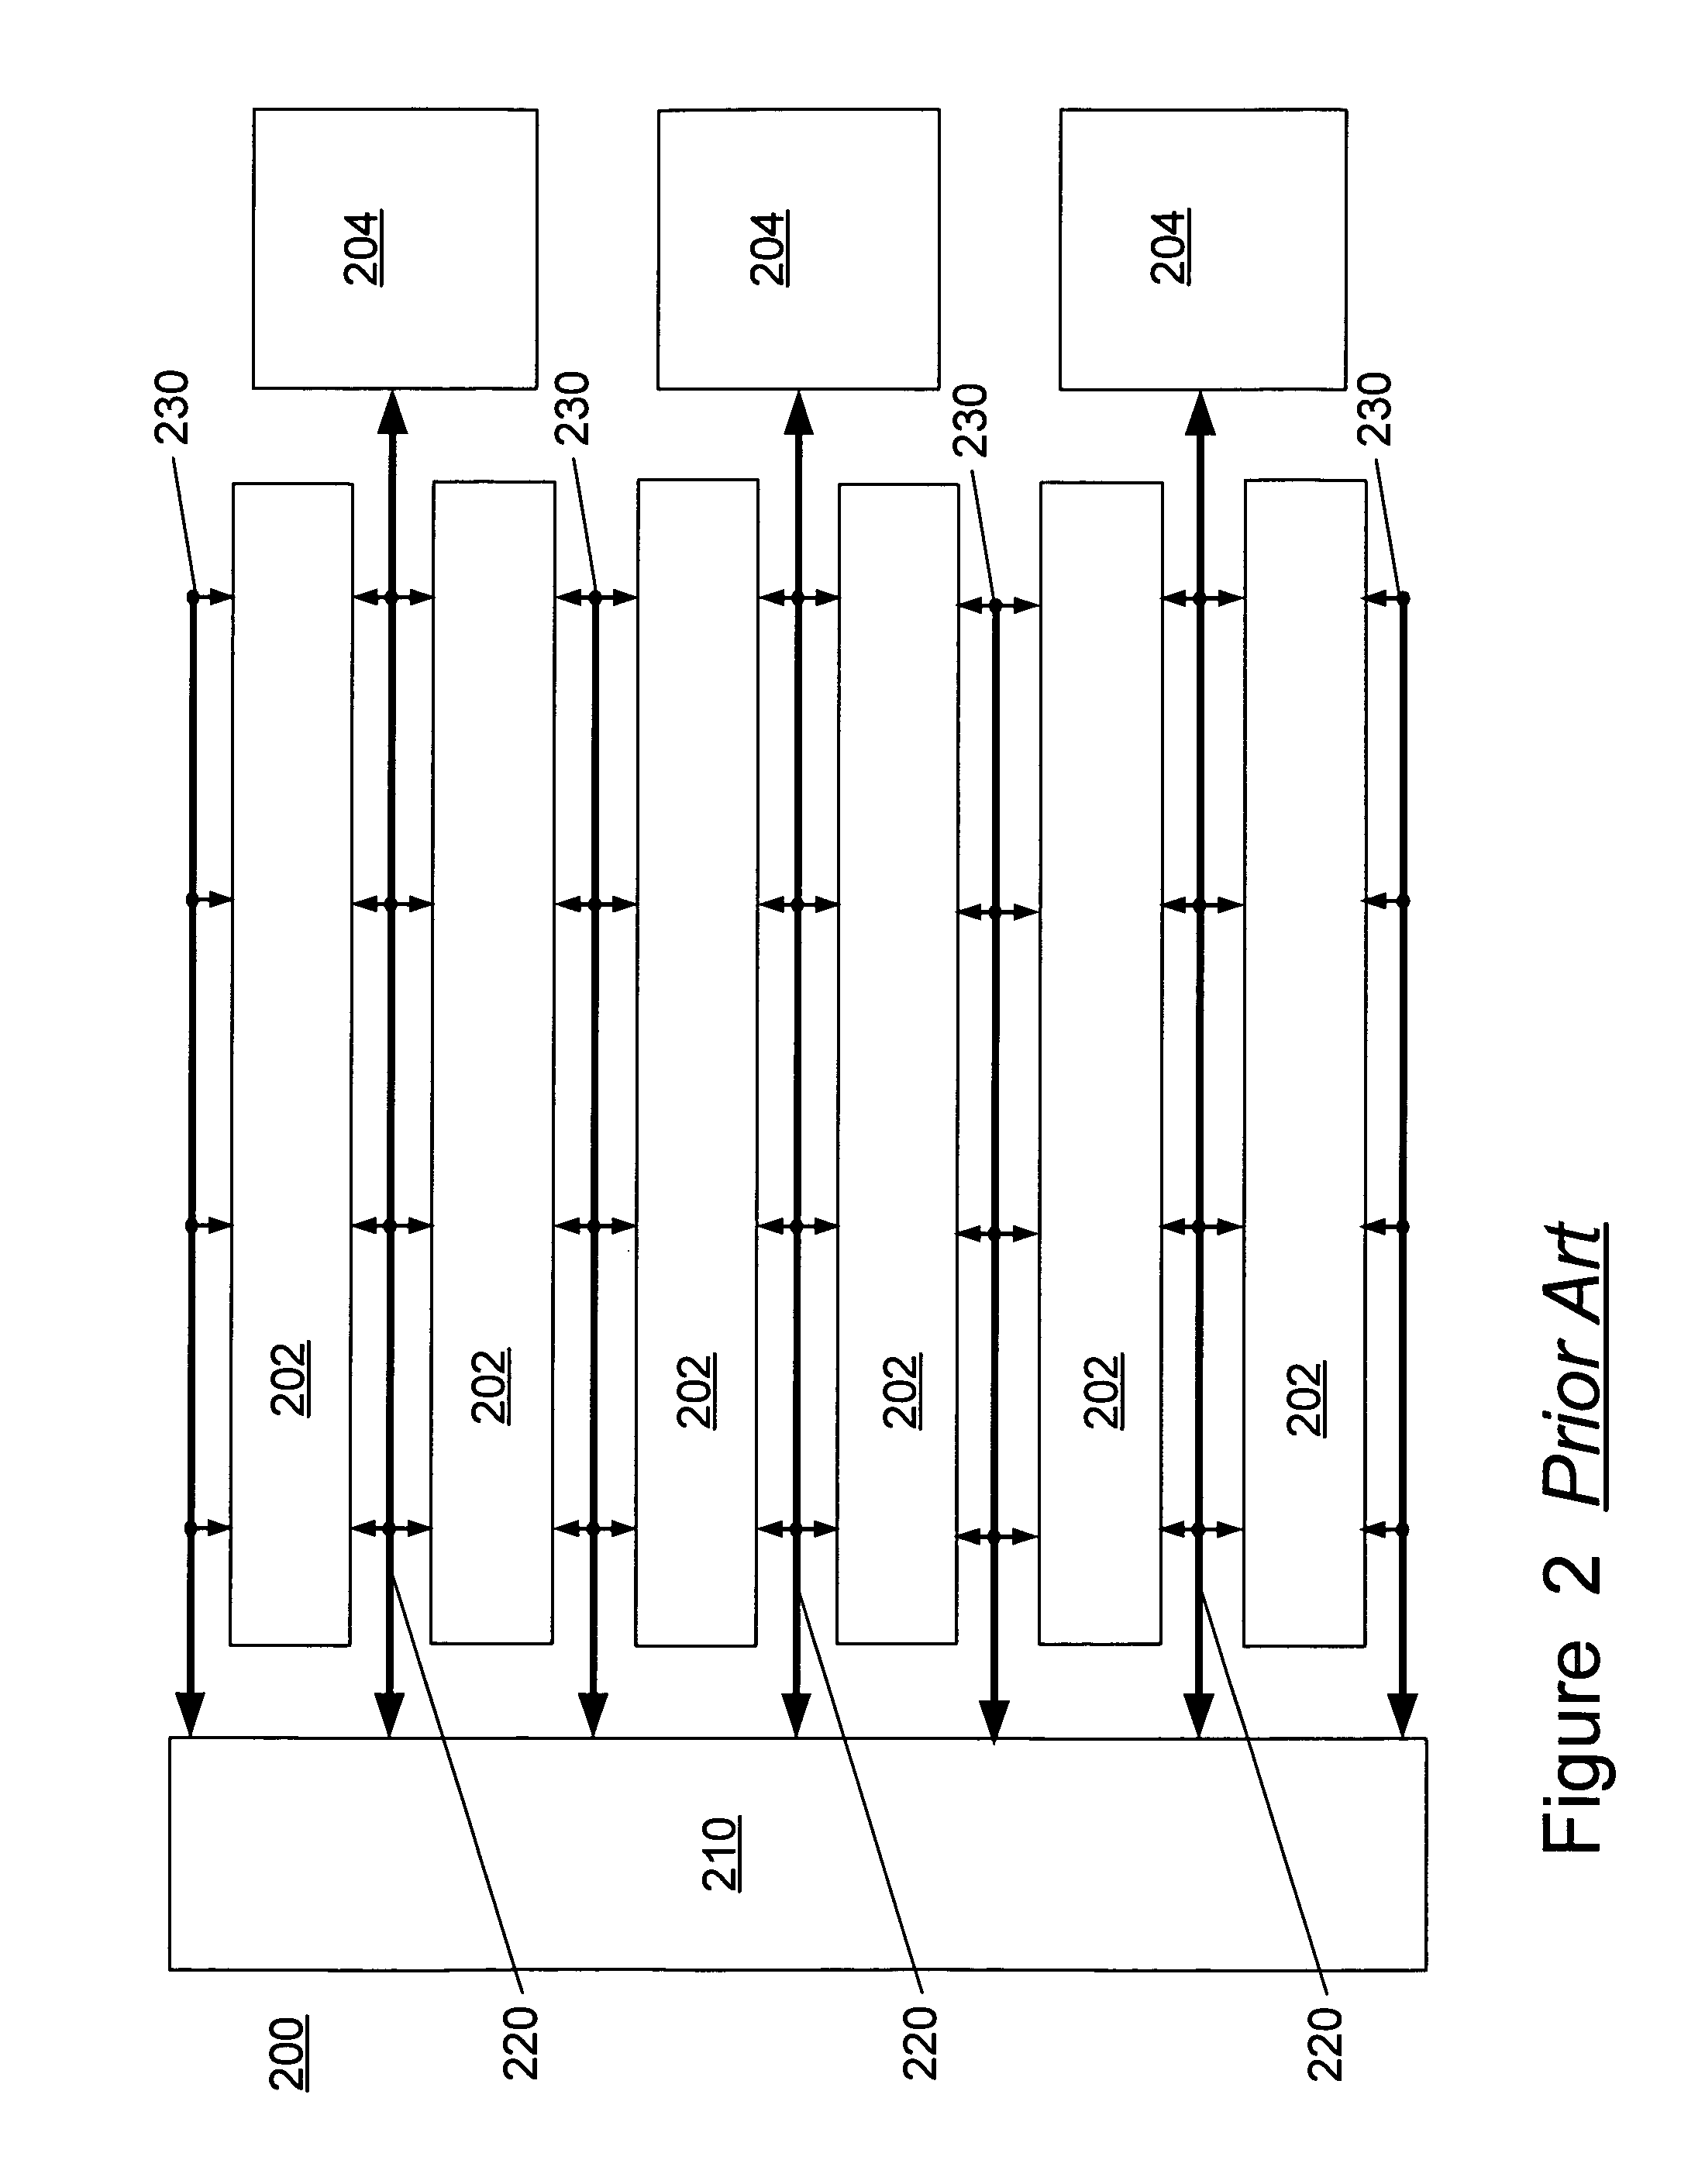 RF power amplifier integrated circuit and unit cell